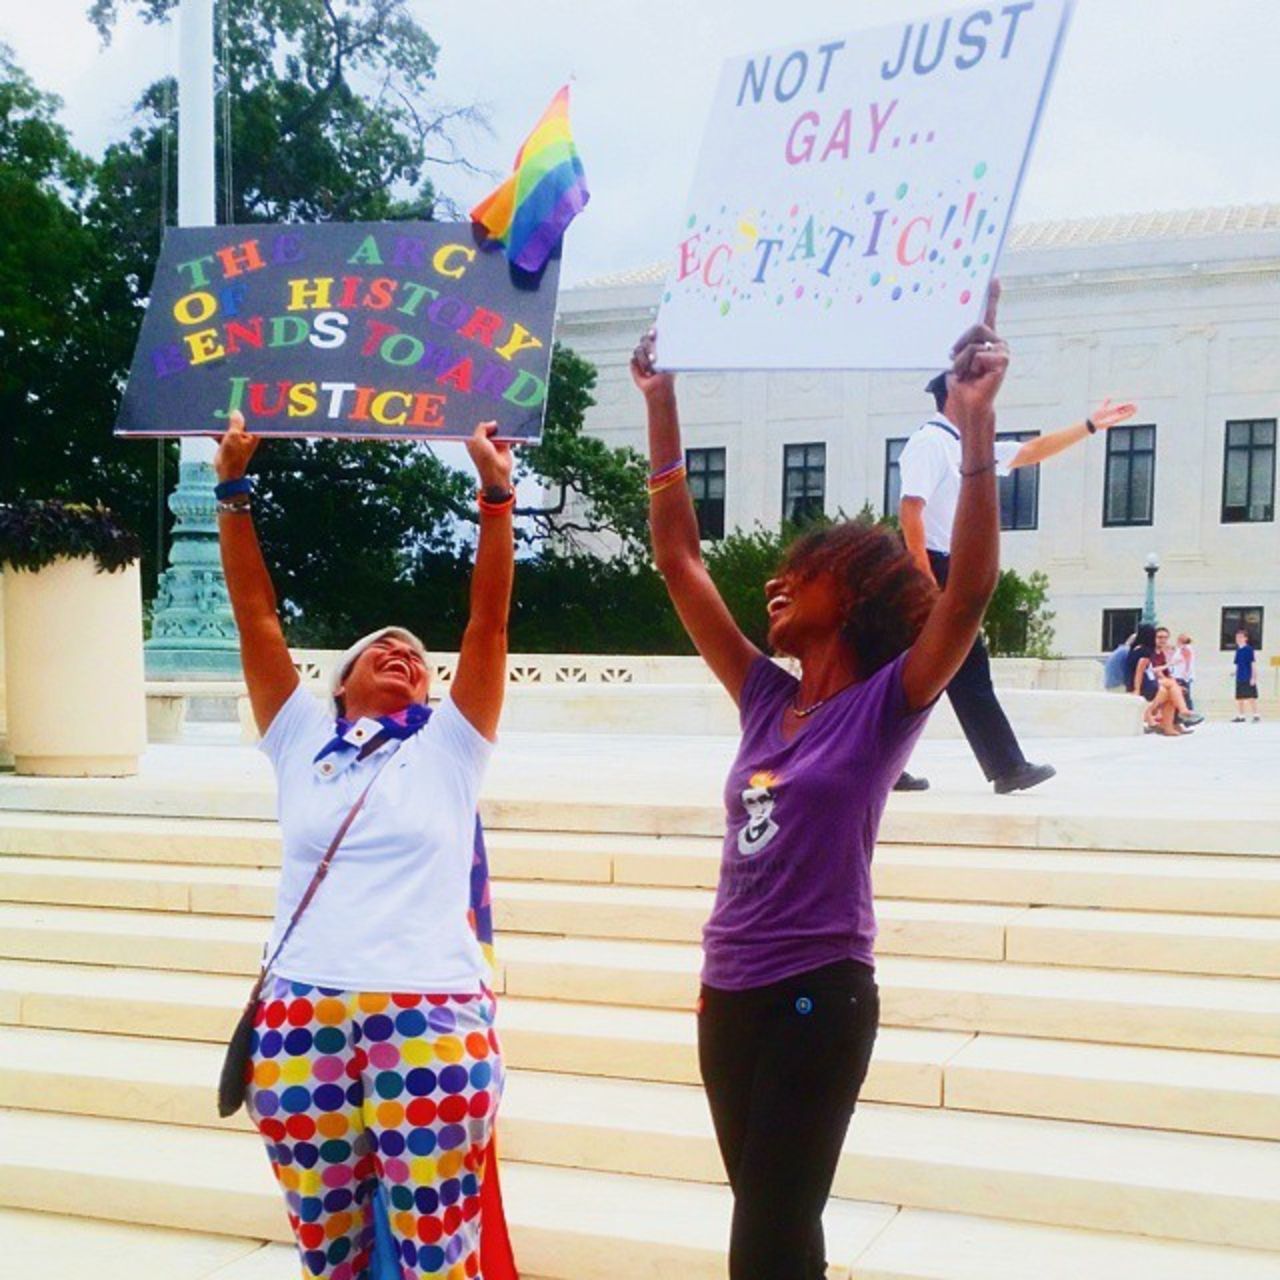 Kristen Nichole captured this photo of two women celebrating the decision to legalize same-sex marriage nationwide on Friday. "So excited to be on the steps of the Supreme Court today supporting the equal marriage decision!" she said via Instagram